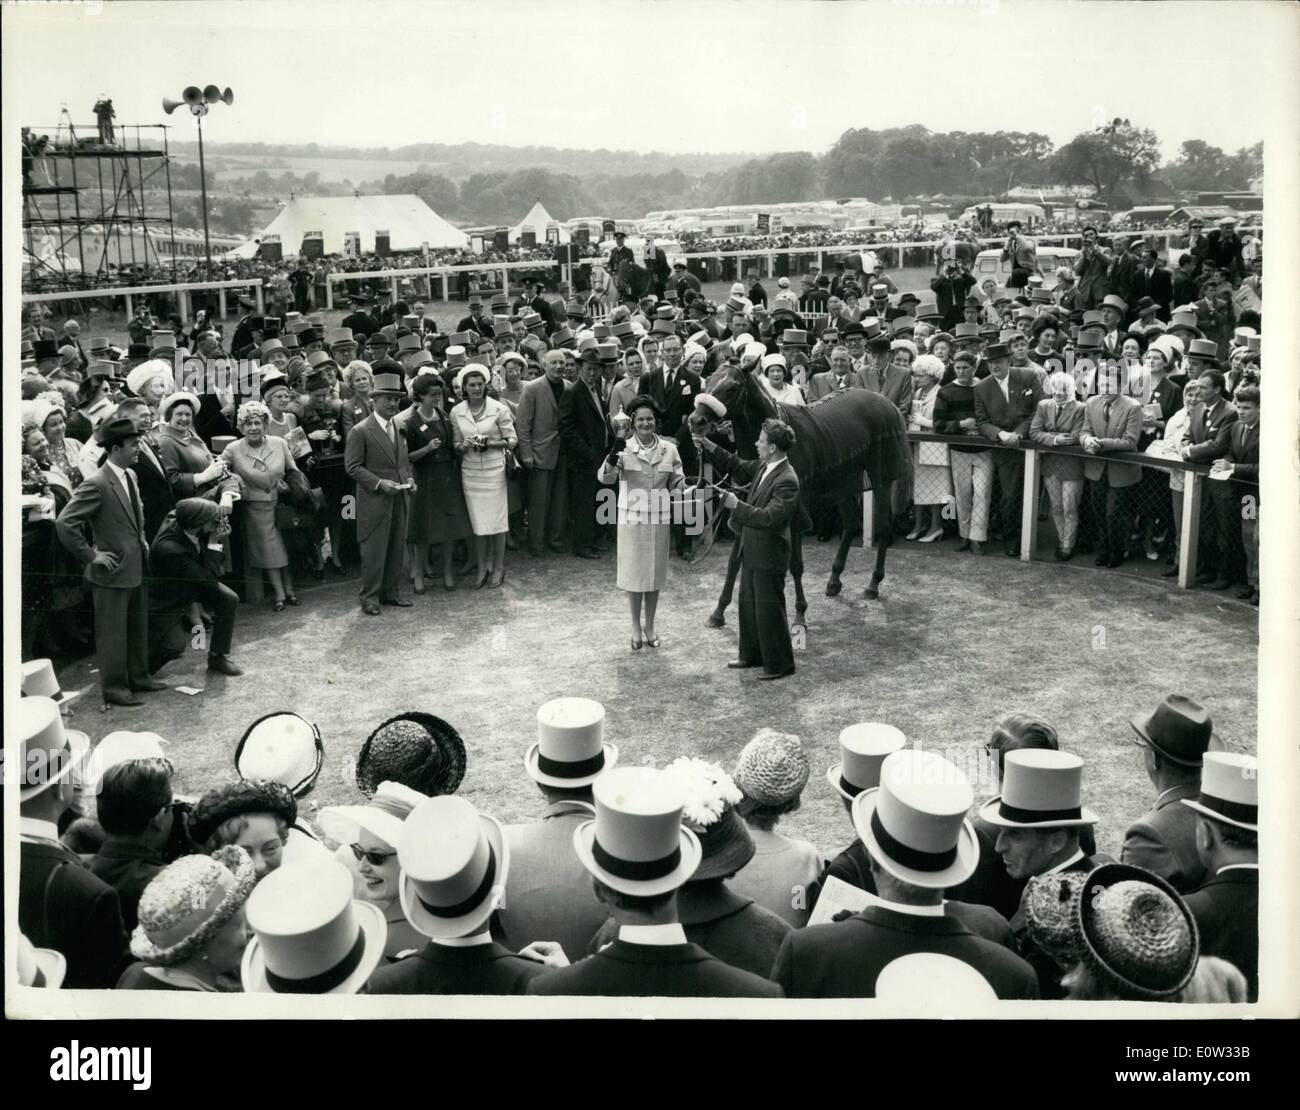 May 05, 1961 - Outsider wins the derby - at Epsom. The winner in unsaddling enclosure.: The Derby was won at Epsom this afternoon by Outsider - ''Psidium'' owned by Mrs. Arpad Plesch - and ridden by R. Poincelet - with ''Dicta Drake'' (M. Garcia) second and ''Pardao'' (W.H. Carr) in third place. Photo shows General view of the Unsaddling enclosure this afternoon - showing the winner 'Psidium'' (R. Poincelet) - as owner Mrs. Arpad Flesch proudly holds the Trophy. Stock Photo